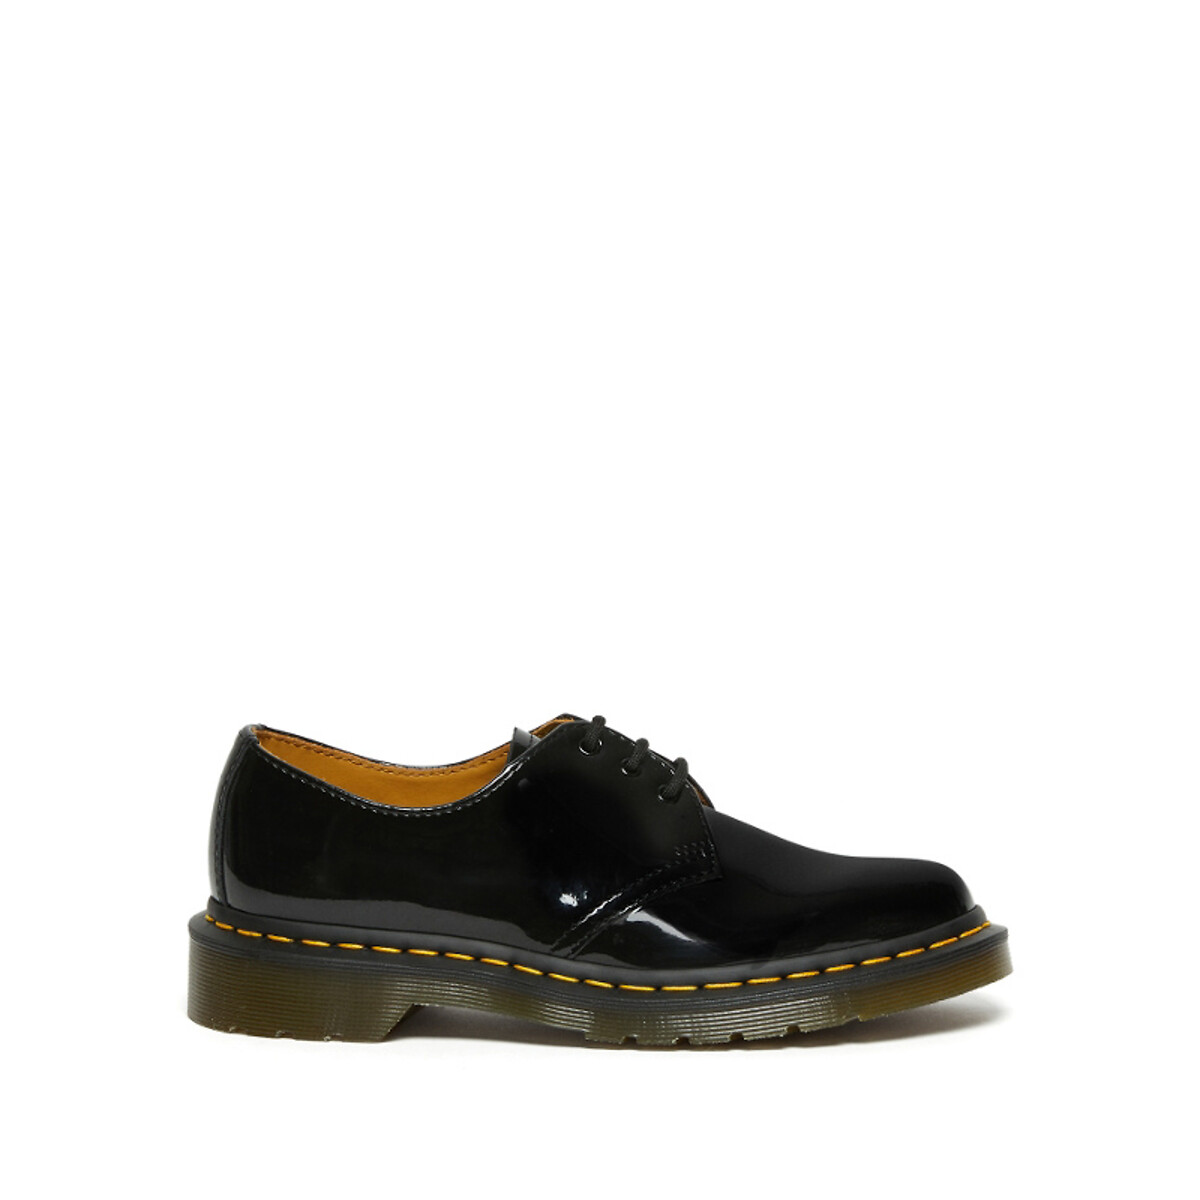 Image of 1461 Patent Leather Brogues